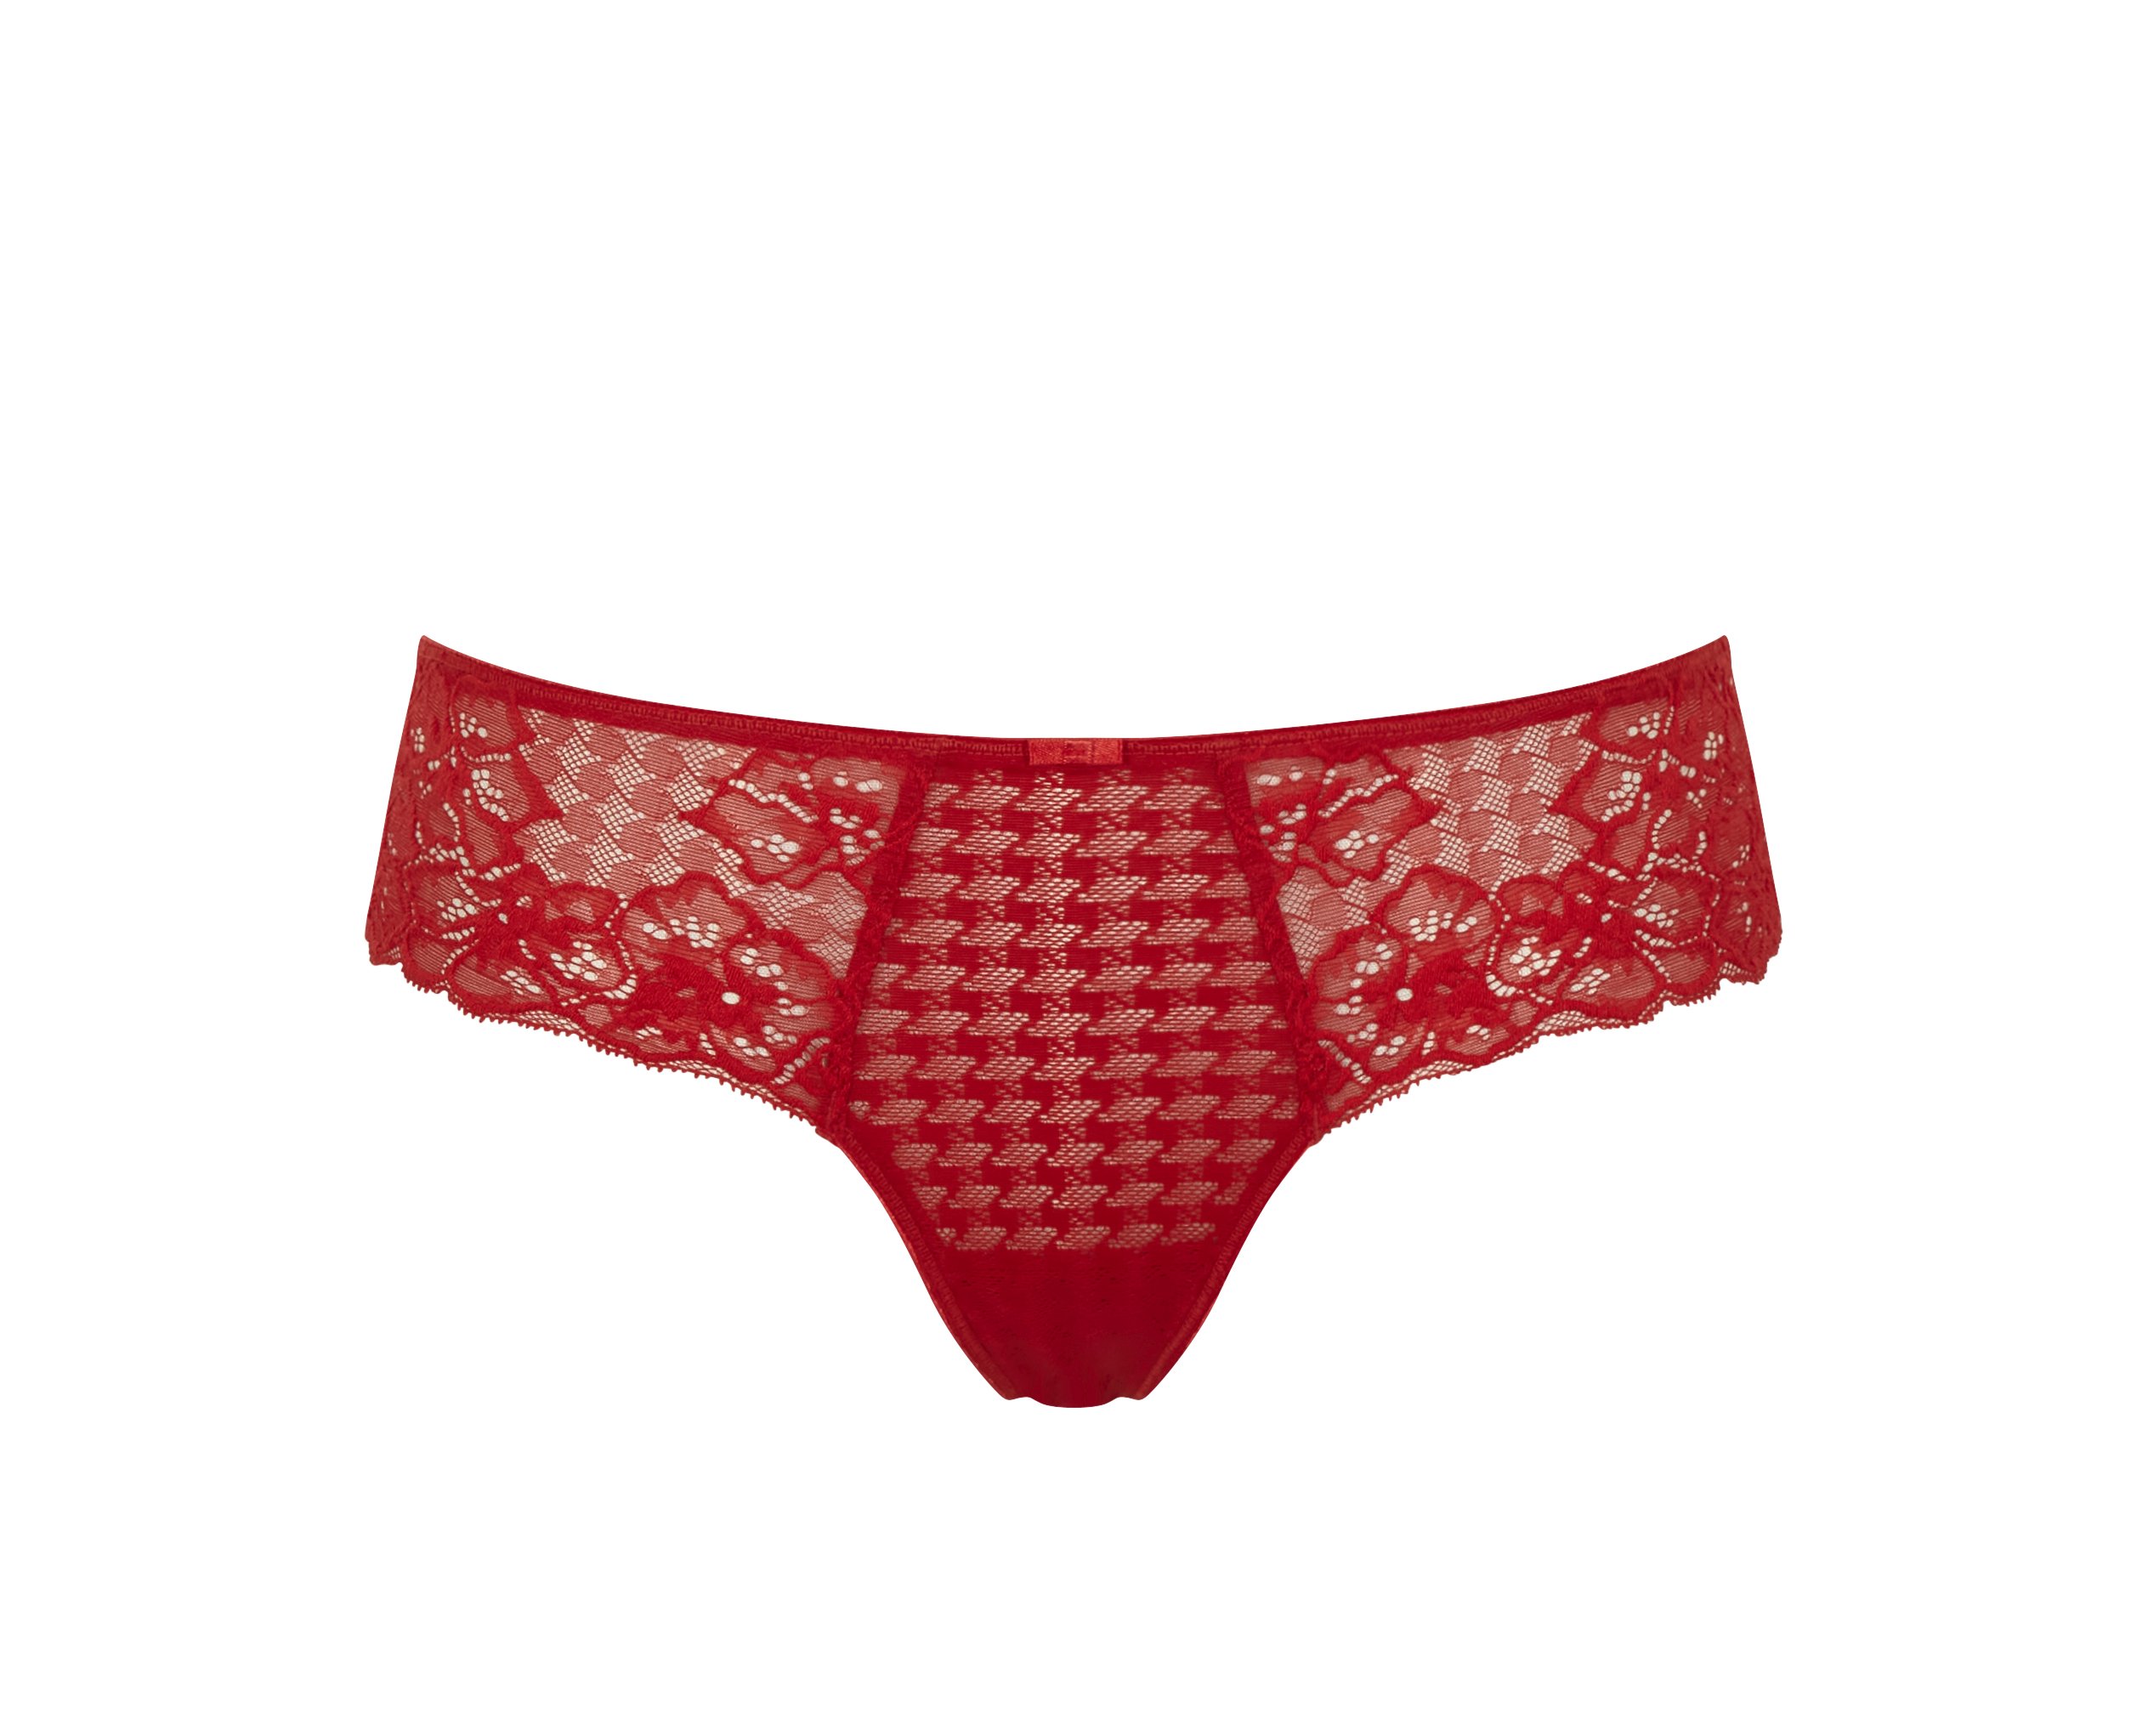 Envy Poppy Red Lace Thong Brief